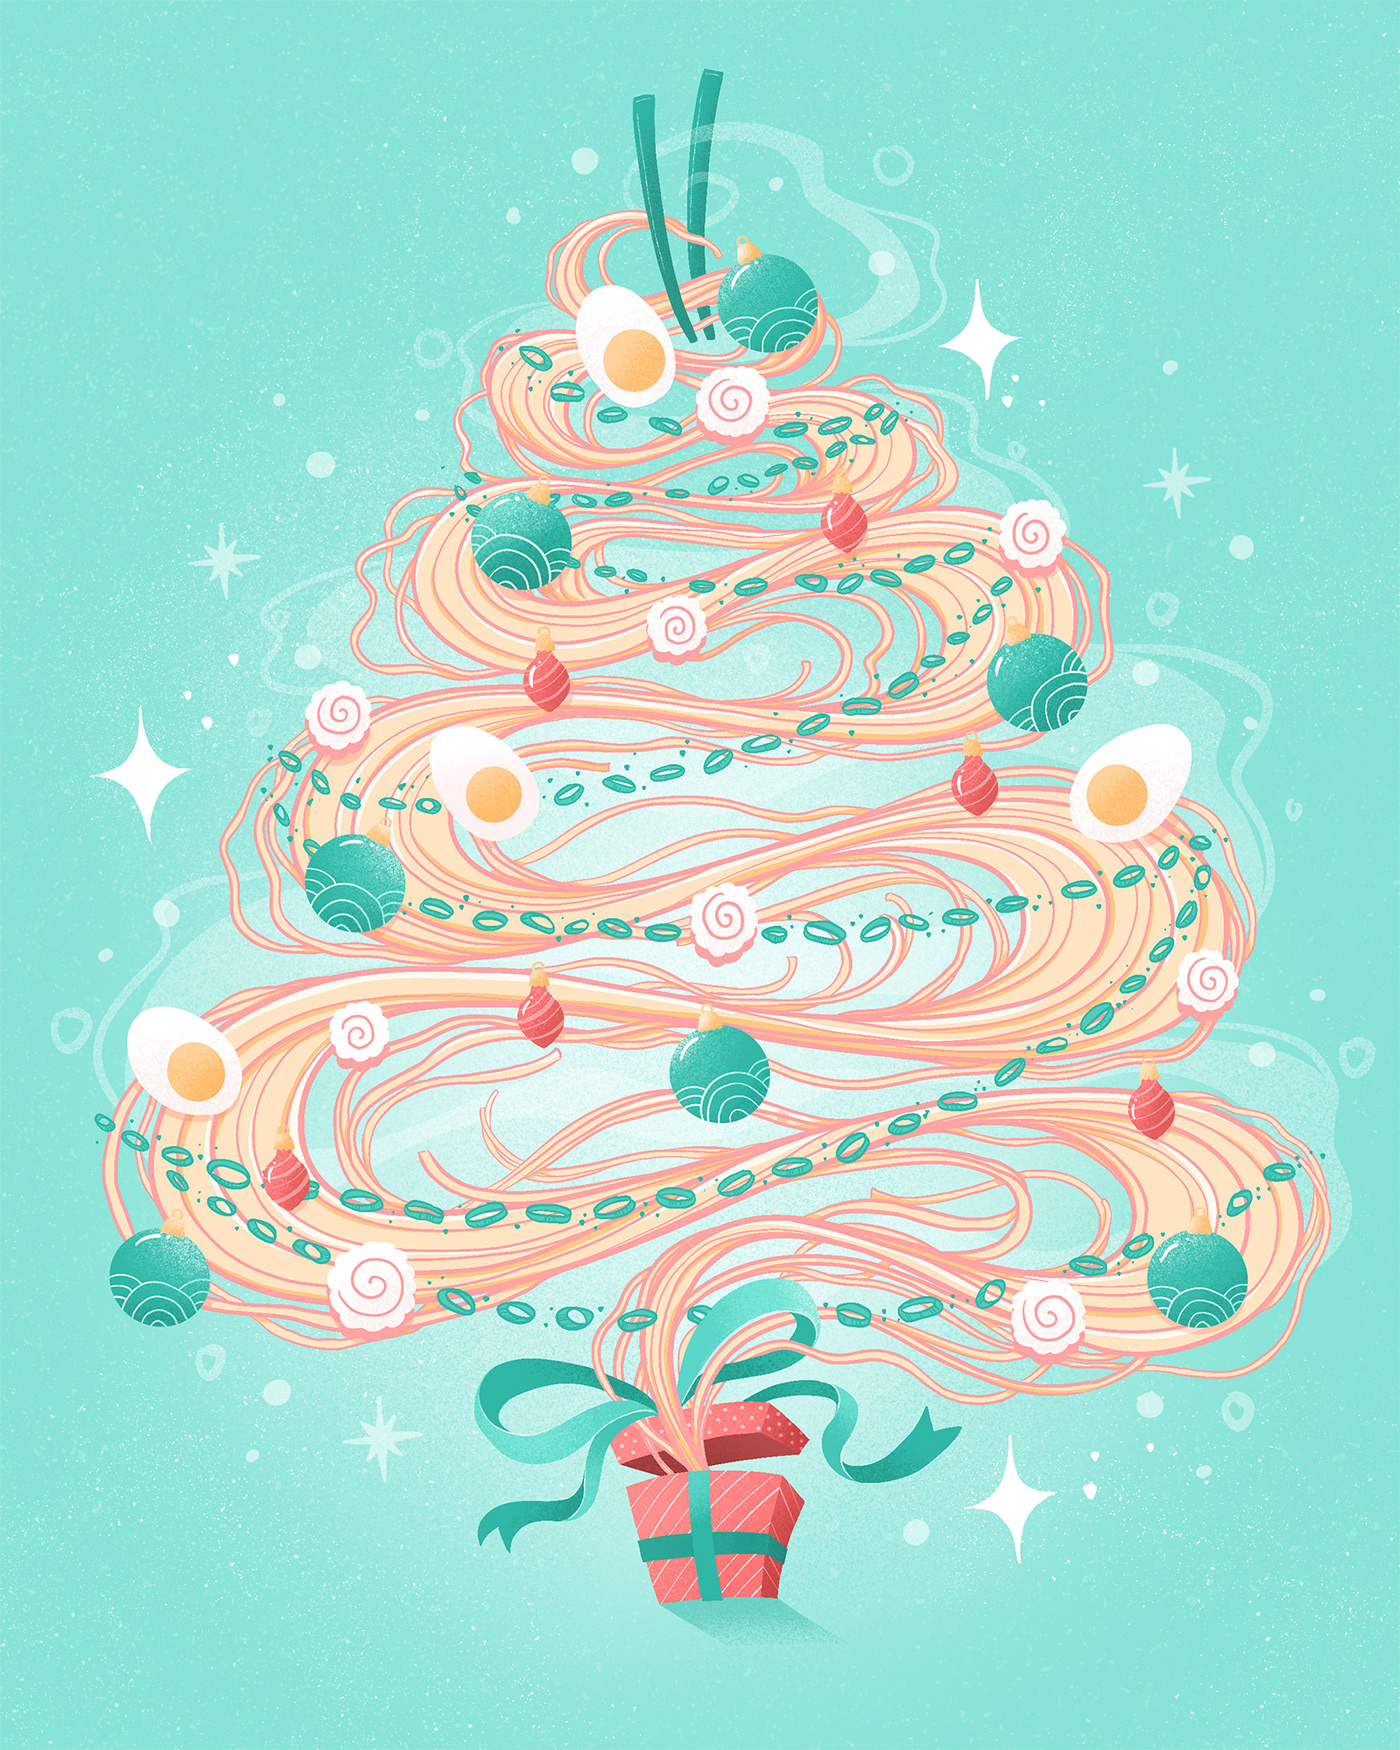 Digital illustration featuring noodles bursting out of a present in the shape of a Christmas tree